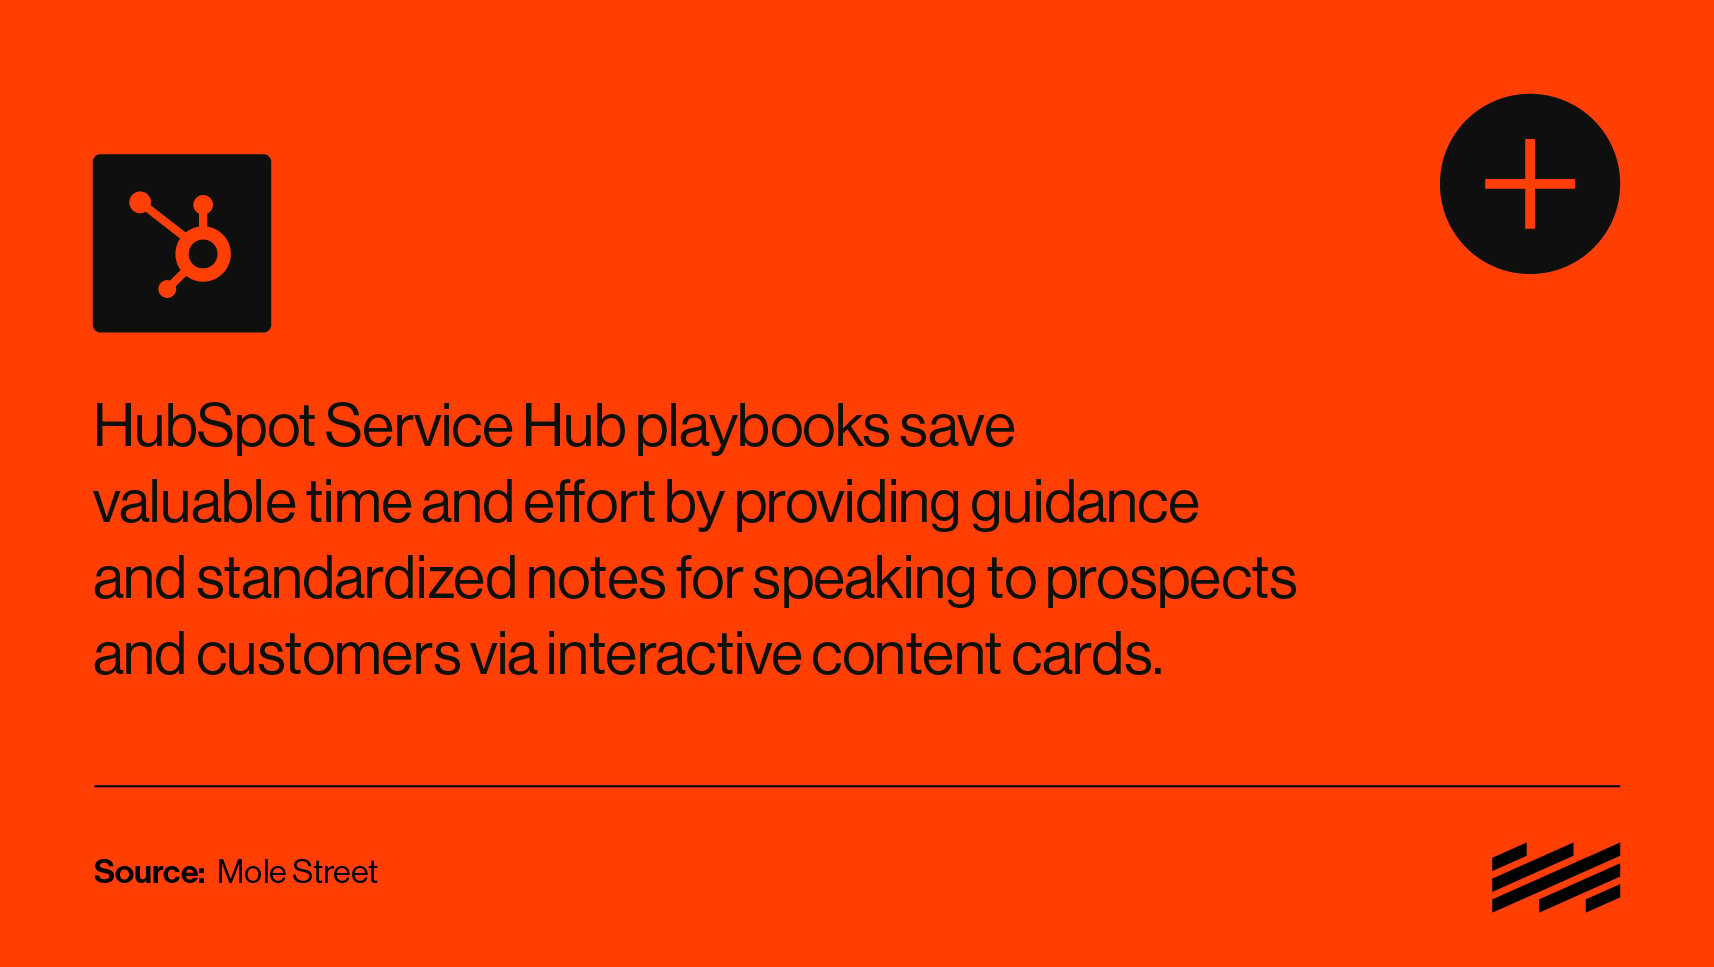 A graphic treatment of text pulled from the article that reads: HubSpot Service Hub playbooks save valuable time and effort by providing guidance and standardized notes for speaking to prospects and customers via interactive content cards